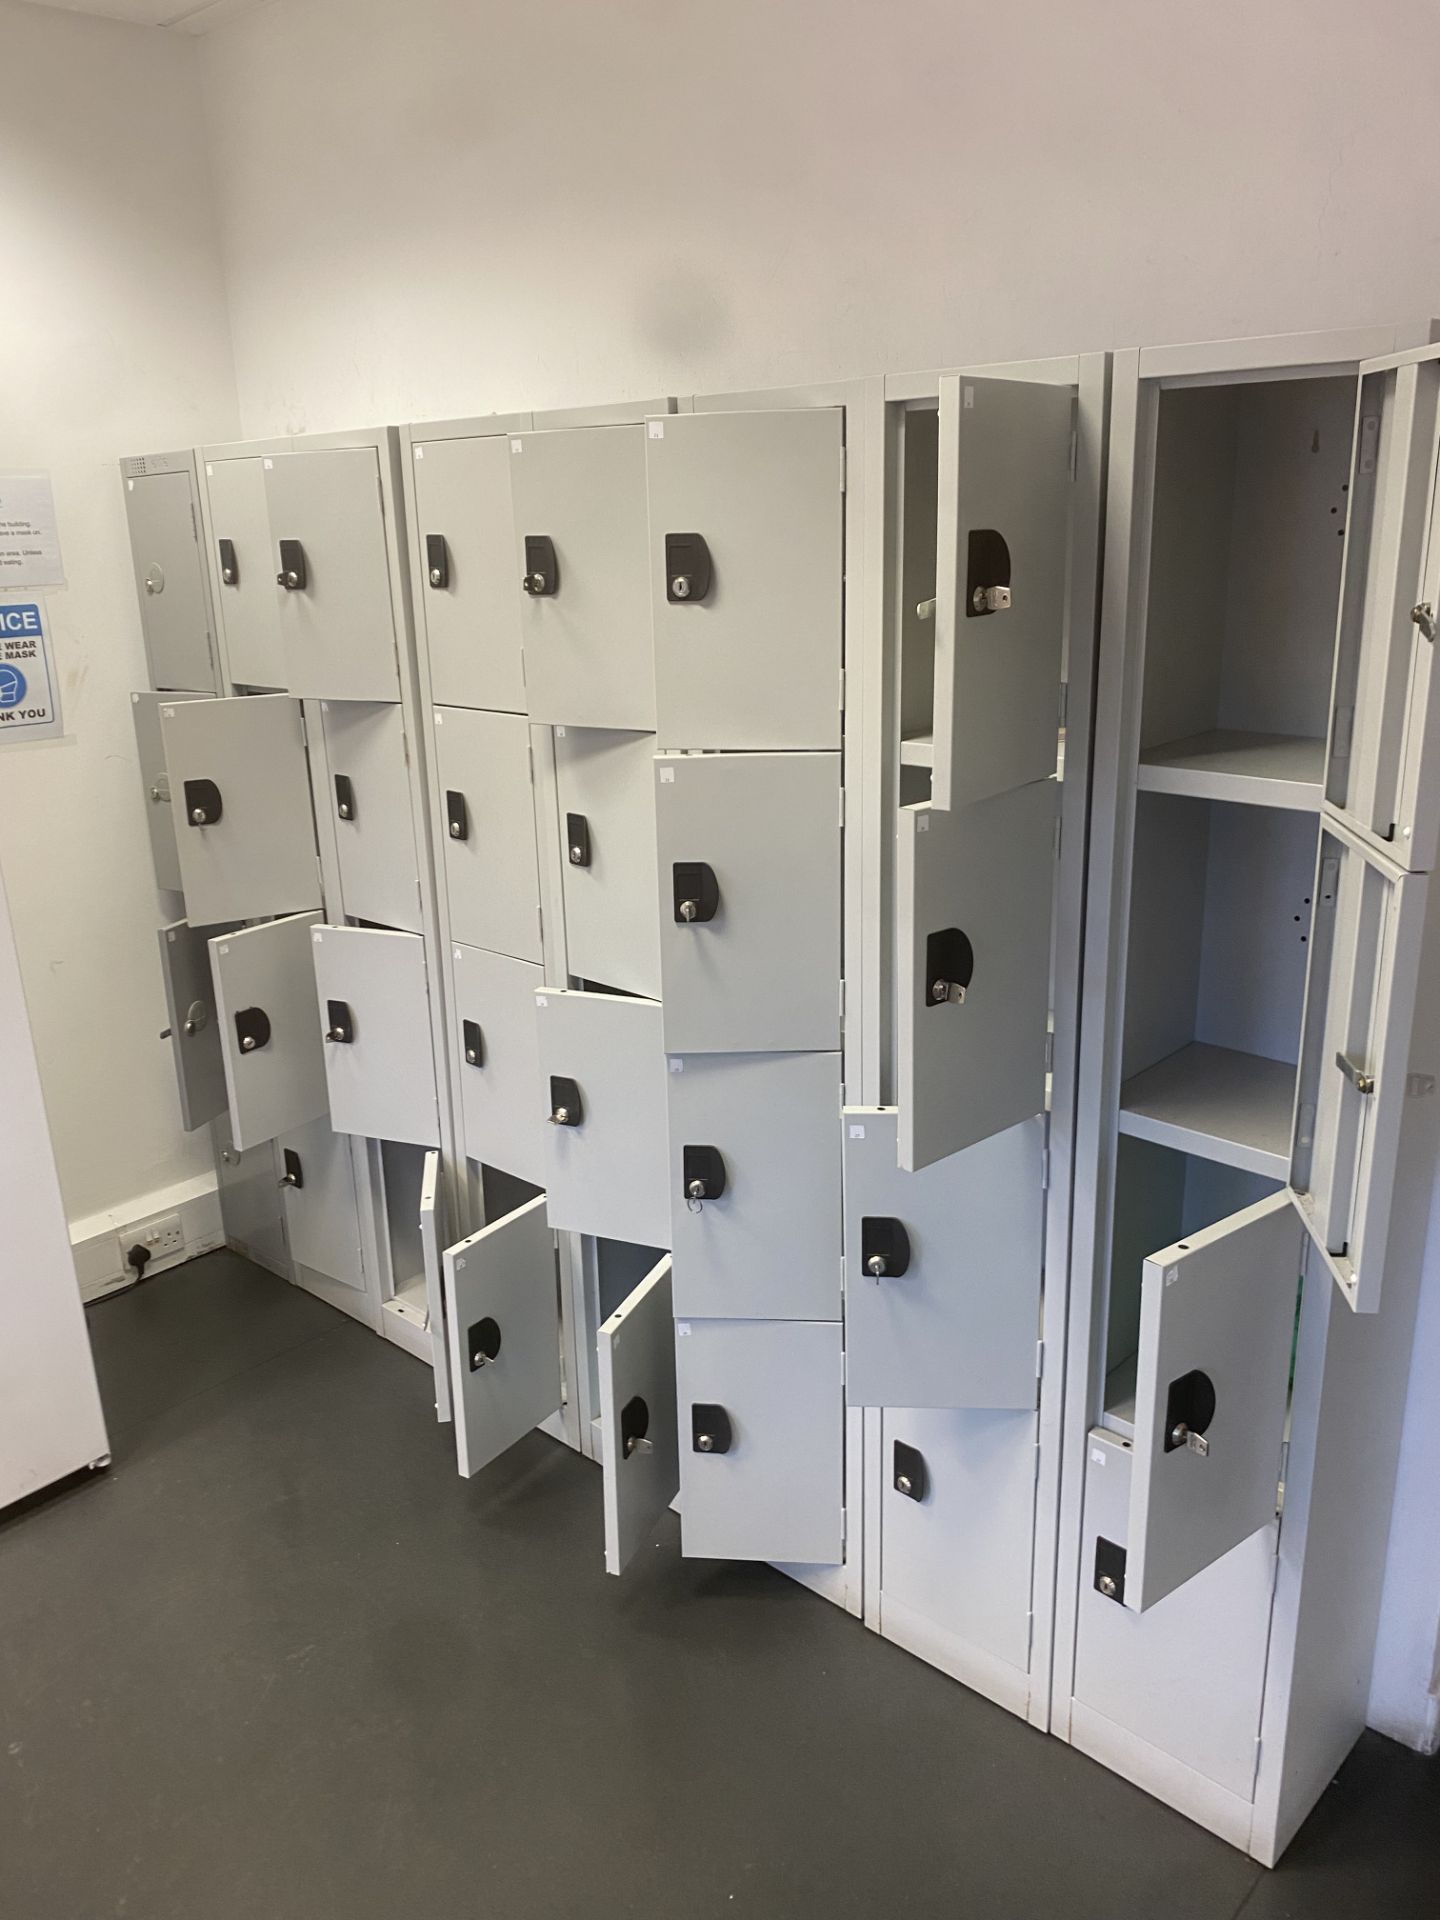 SET OF 7 STACKS OF 4 LOCKERS STAFF CANTEEN GYM - Image 4 of 5